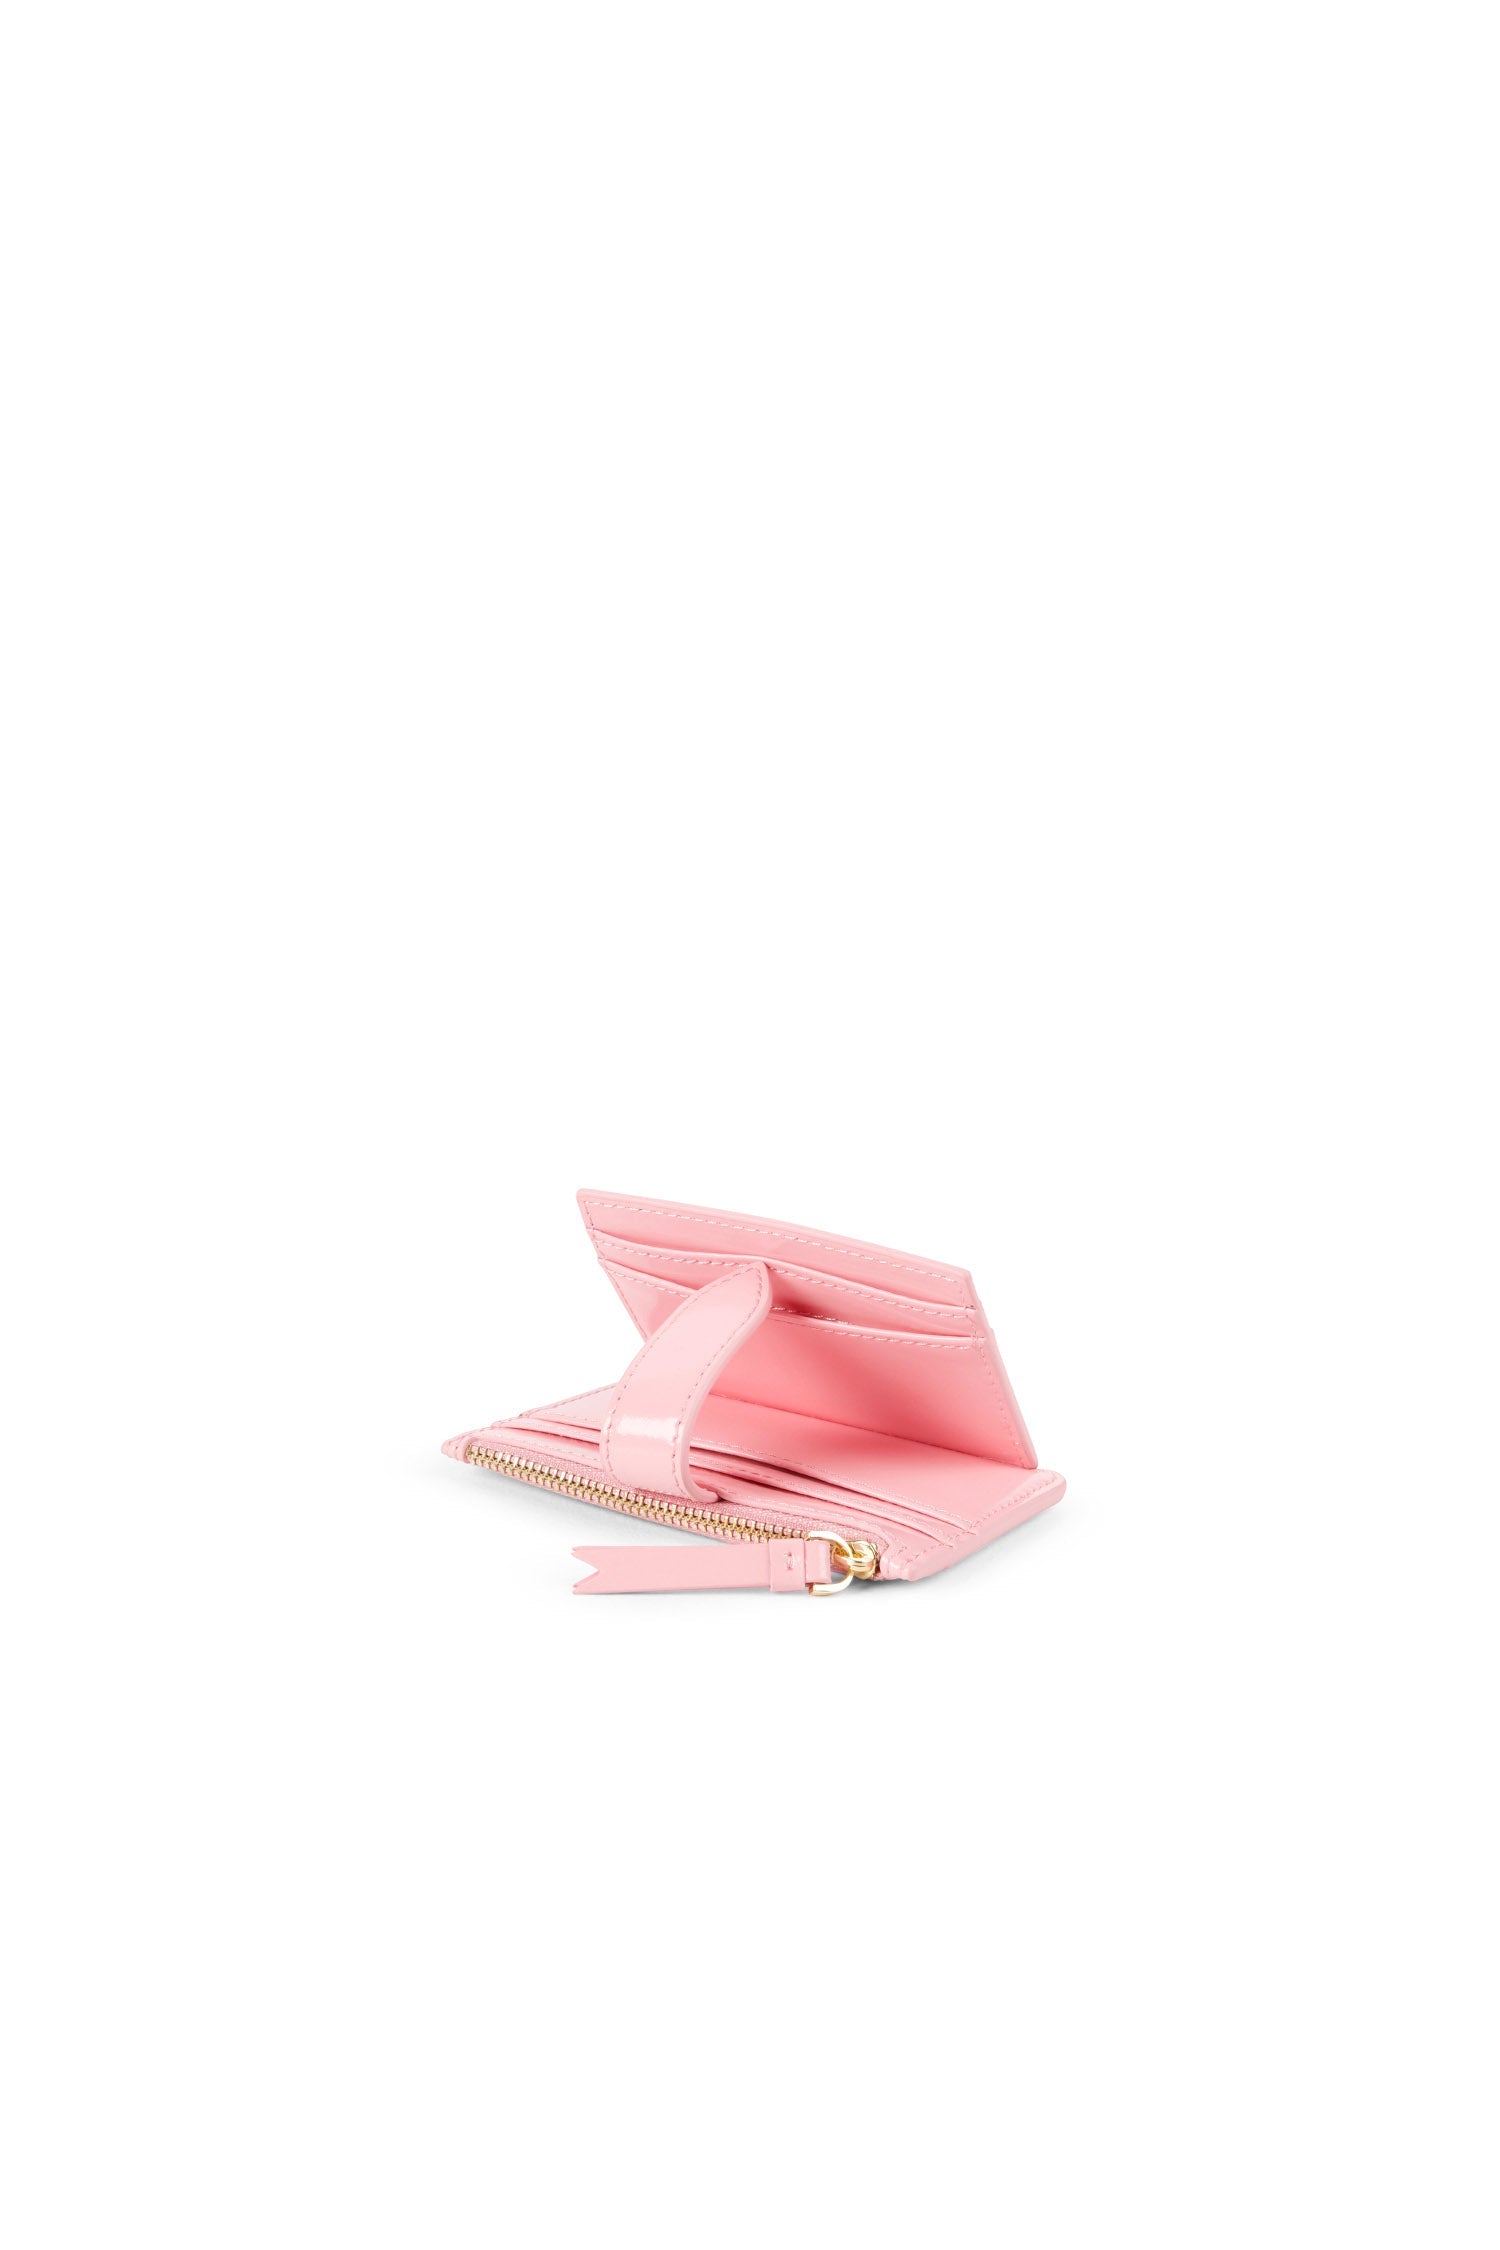 The Zoe Patent Card Wallet Candy Pink - Gift Edit